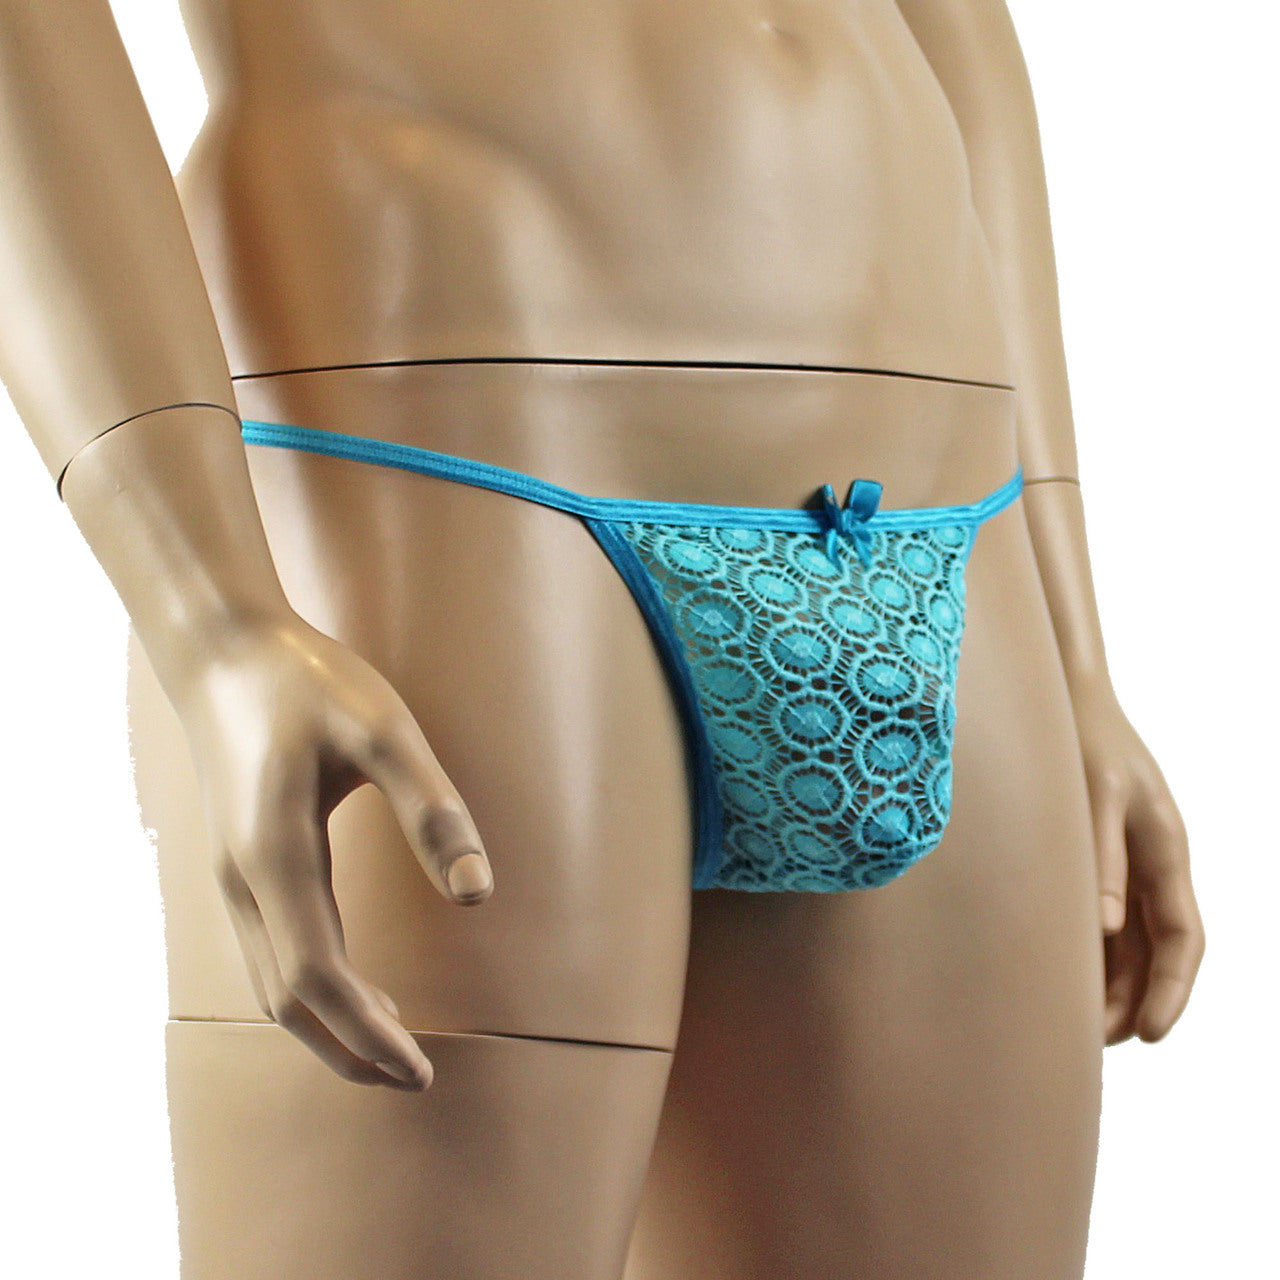 Mens Tease Circle Lace Pouch G string with Cute Bow Front Aqua